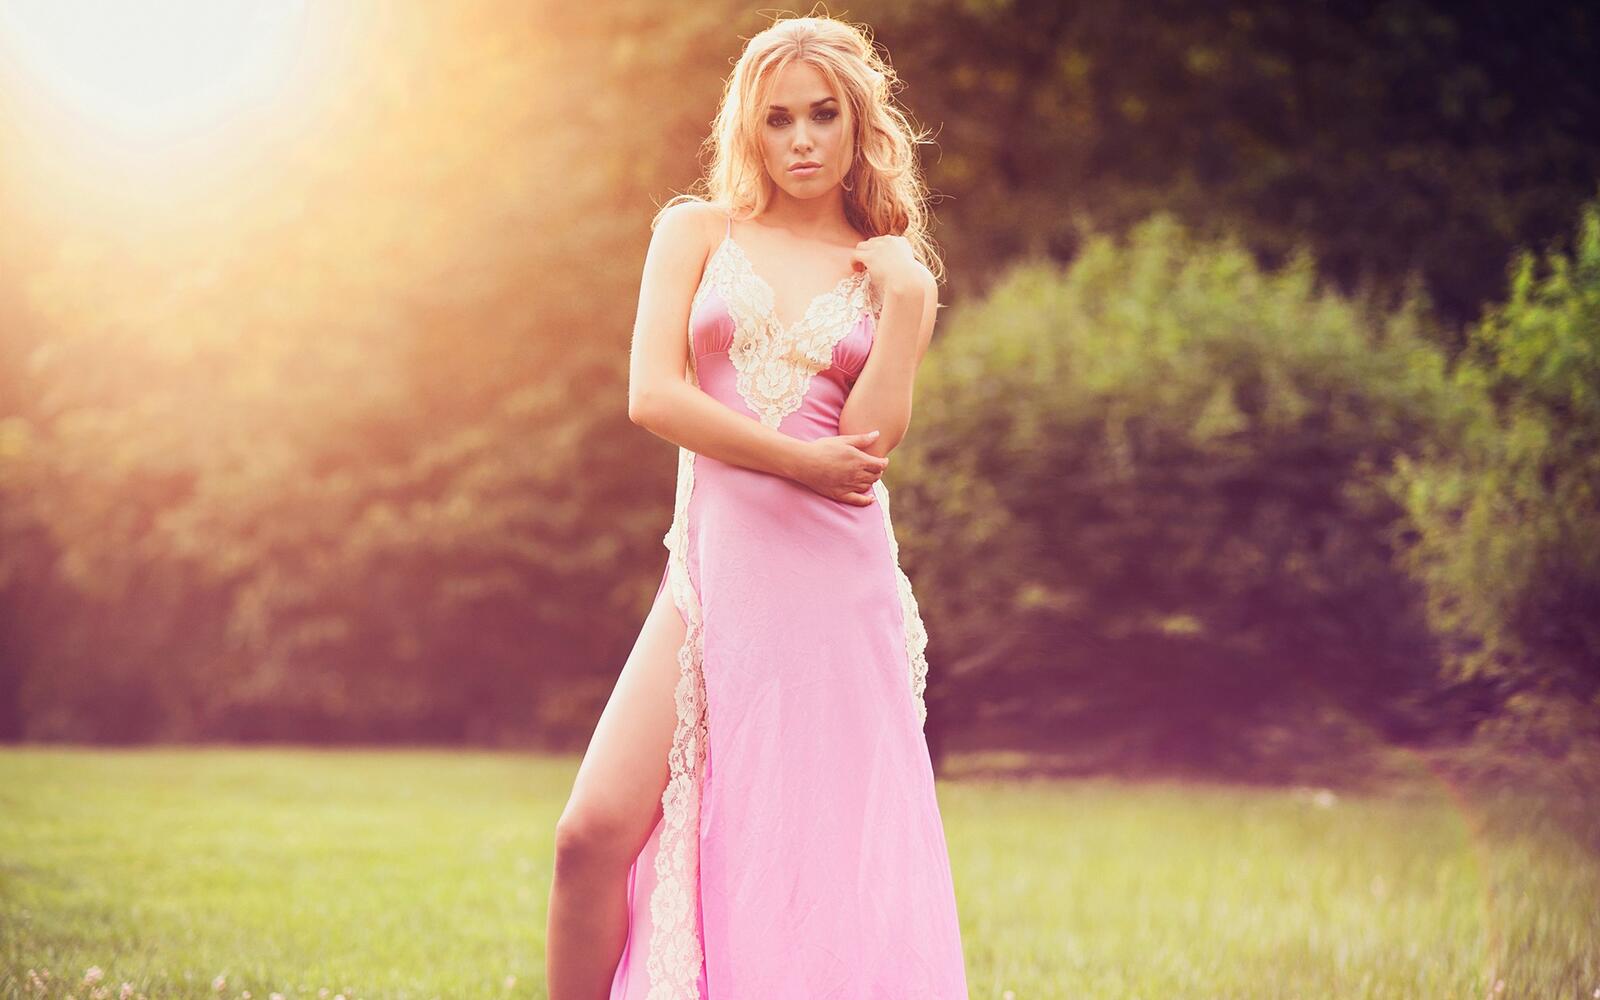 Free photo Blond girl in a pink dress